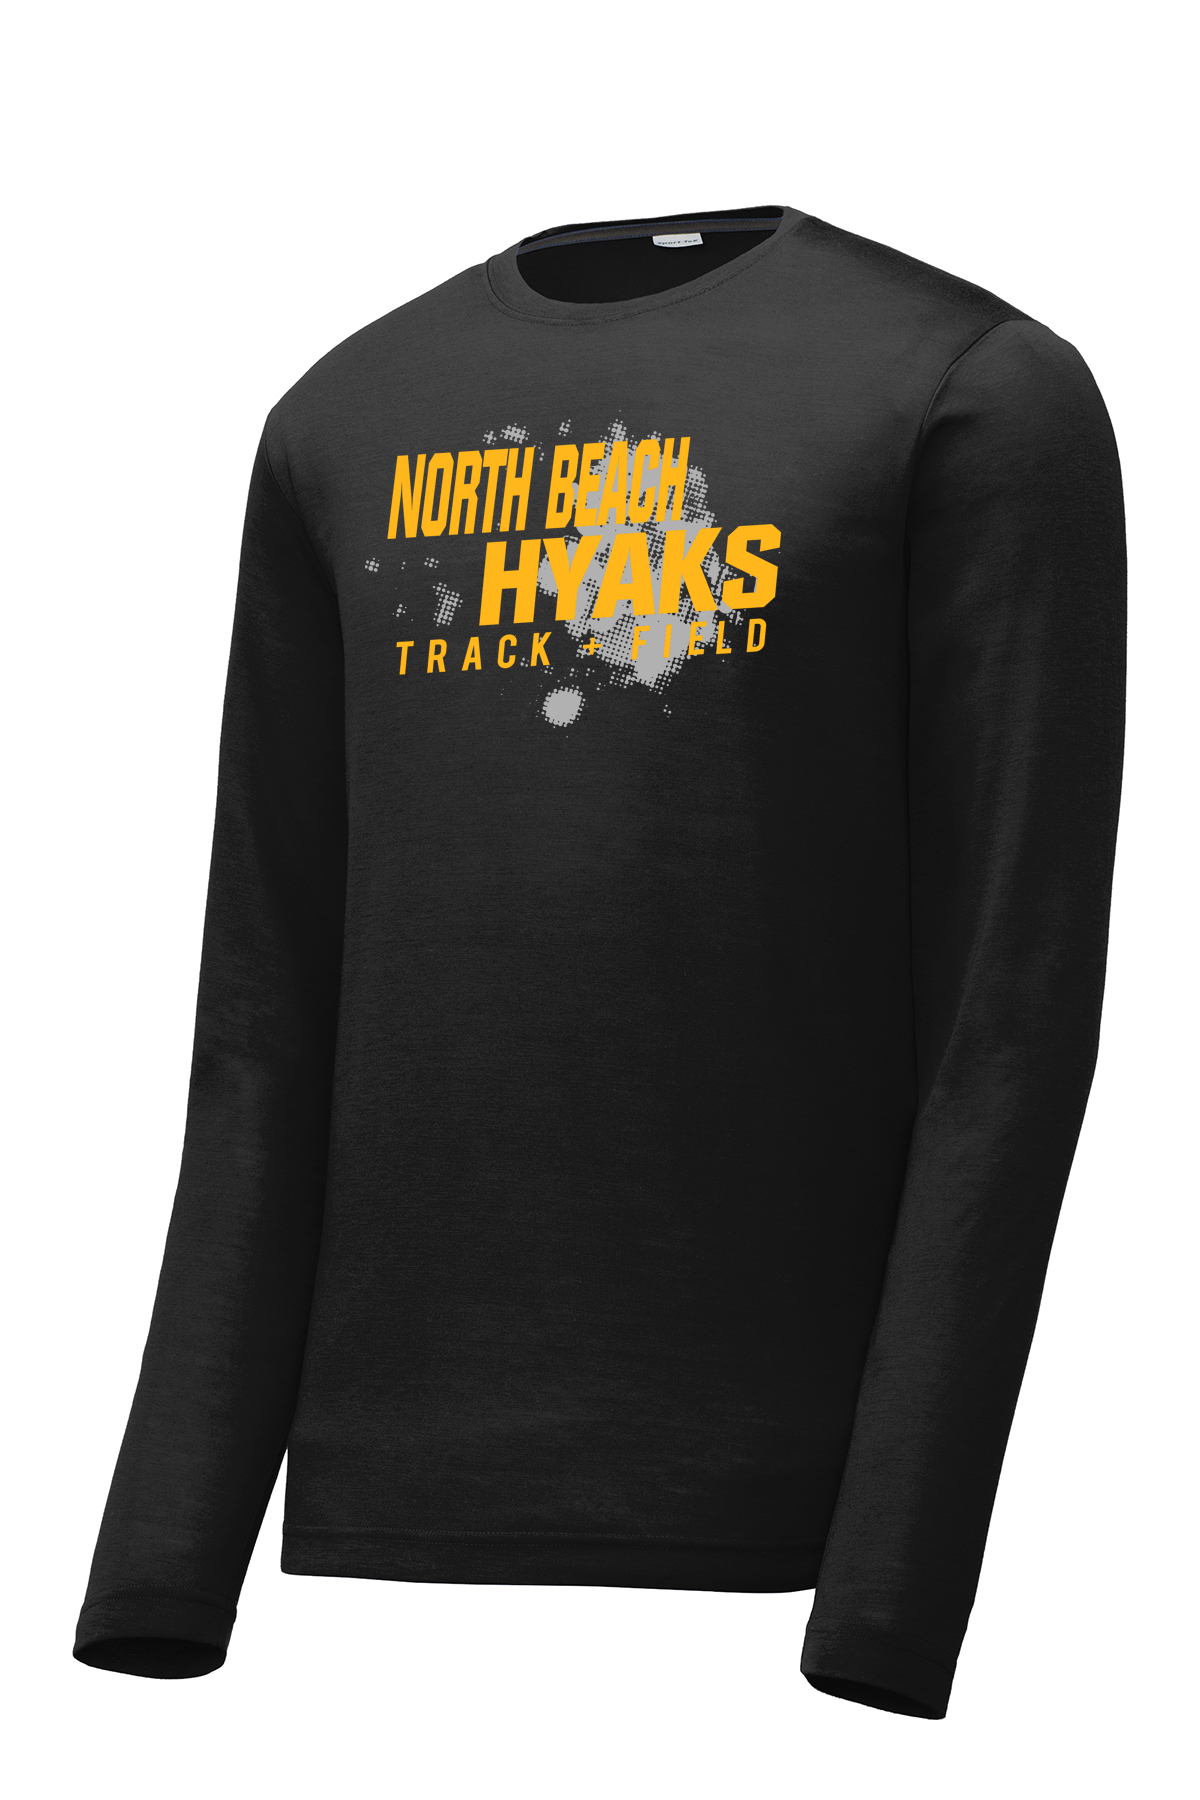 North Beach Track & Field Long Sleeve CottonTouch Performance Shirt